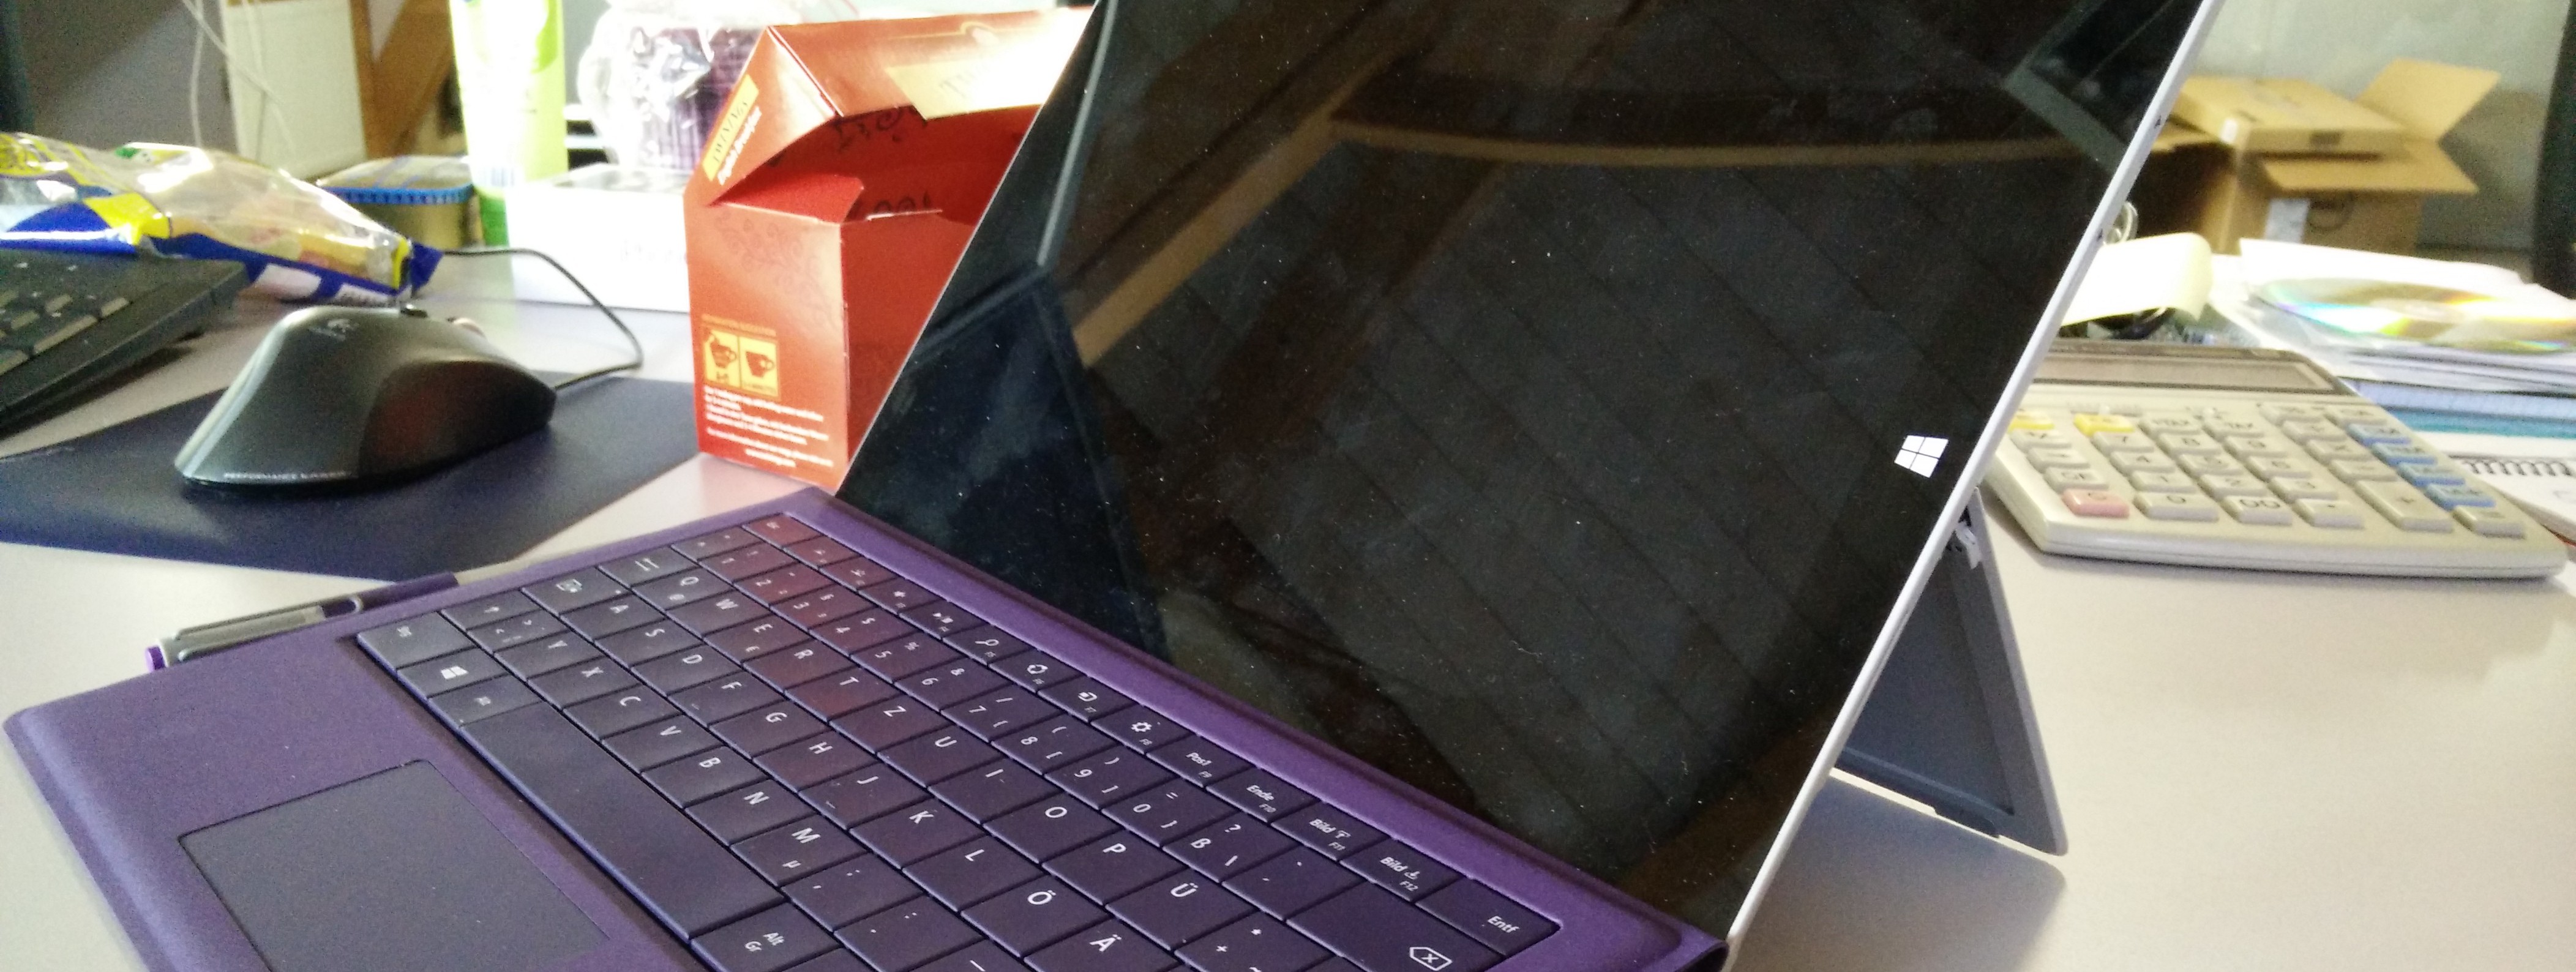 A short Hands-on: Microsoft Surface 3 Pro